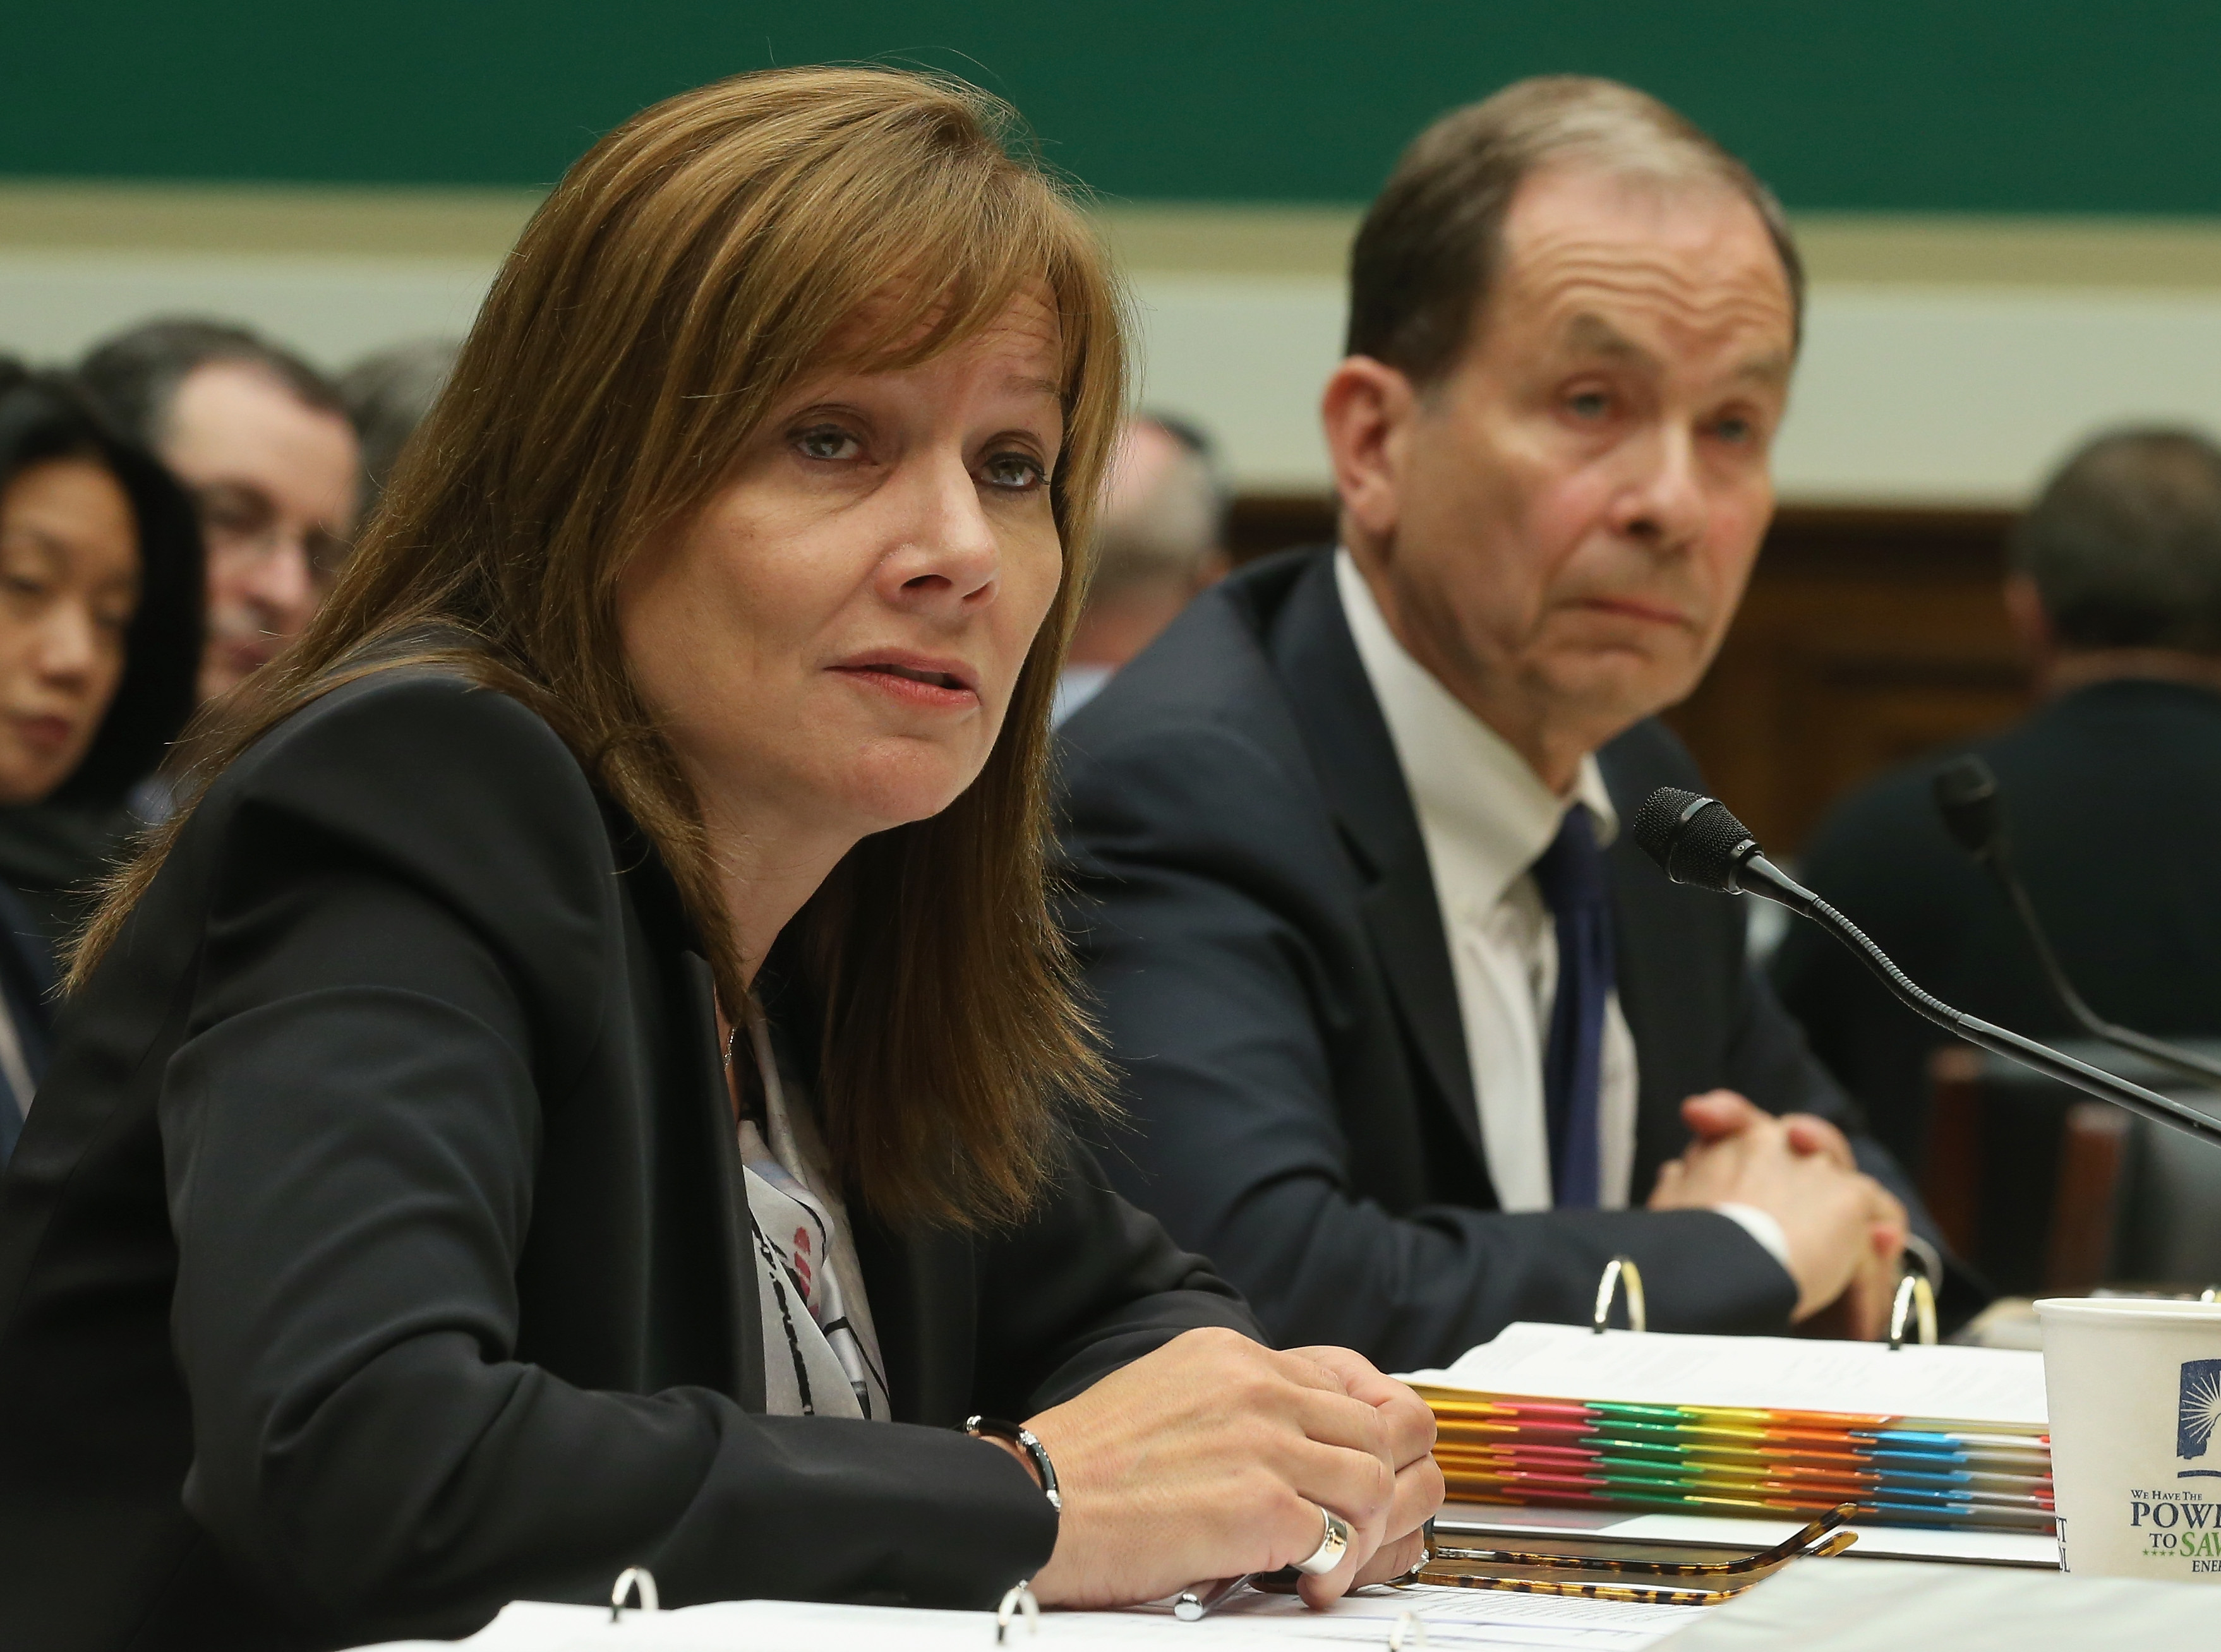 GM CEO Mary Barra Testifies At House Hearing On Ignition Switch Recall